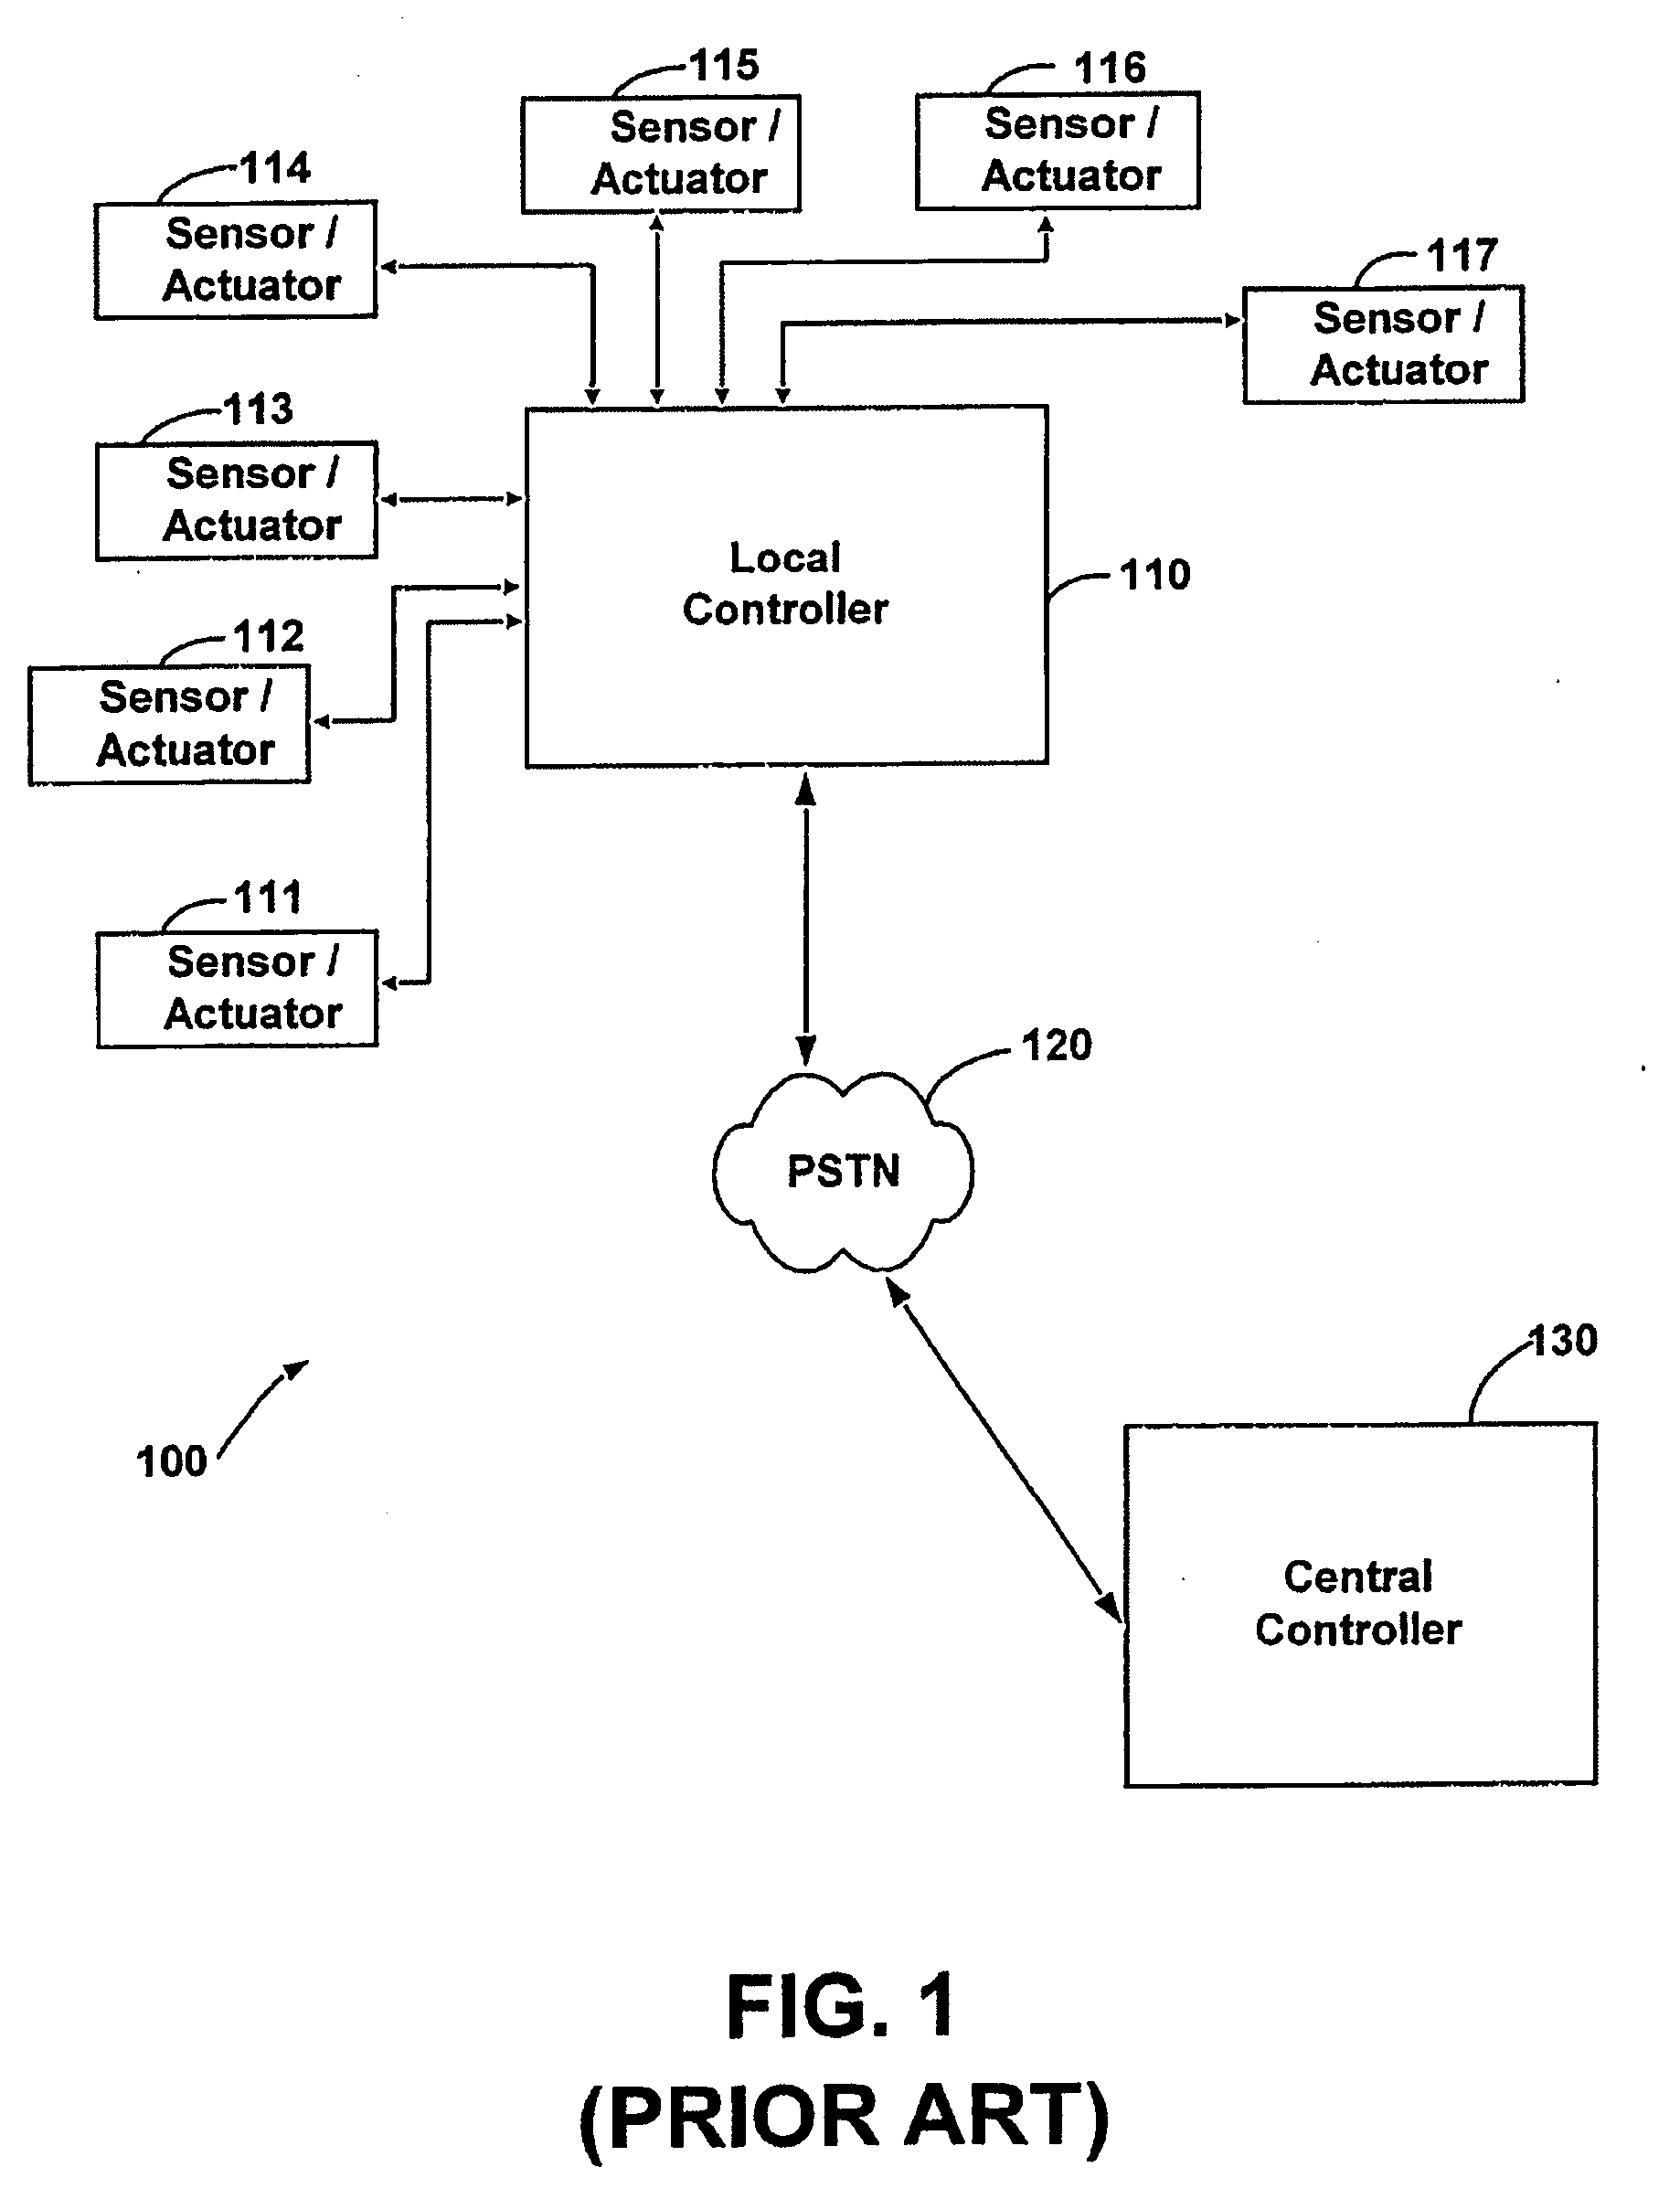 Systems and methods for monitoring and controlling remote devices